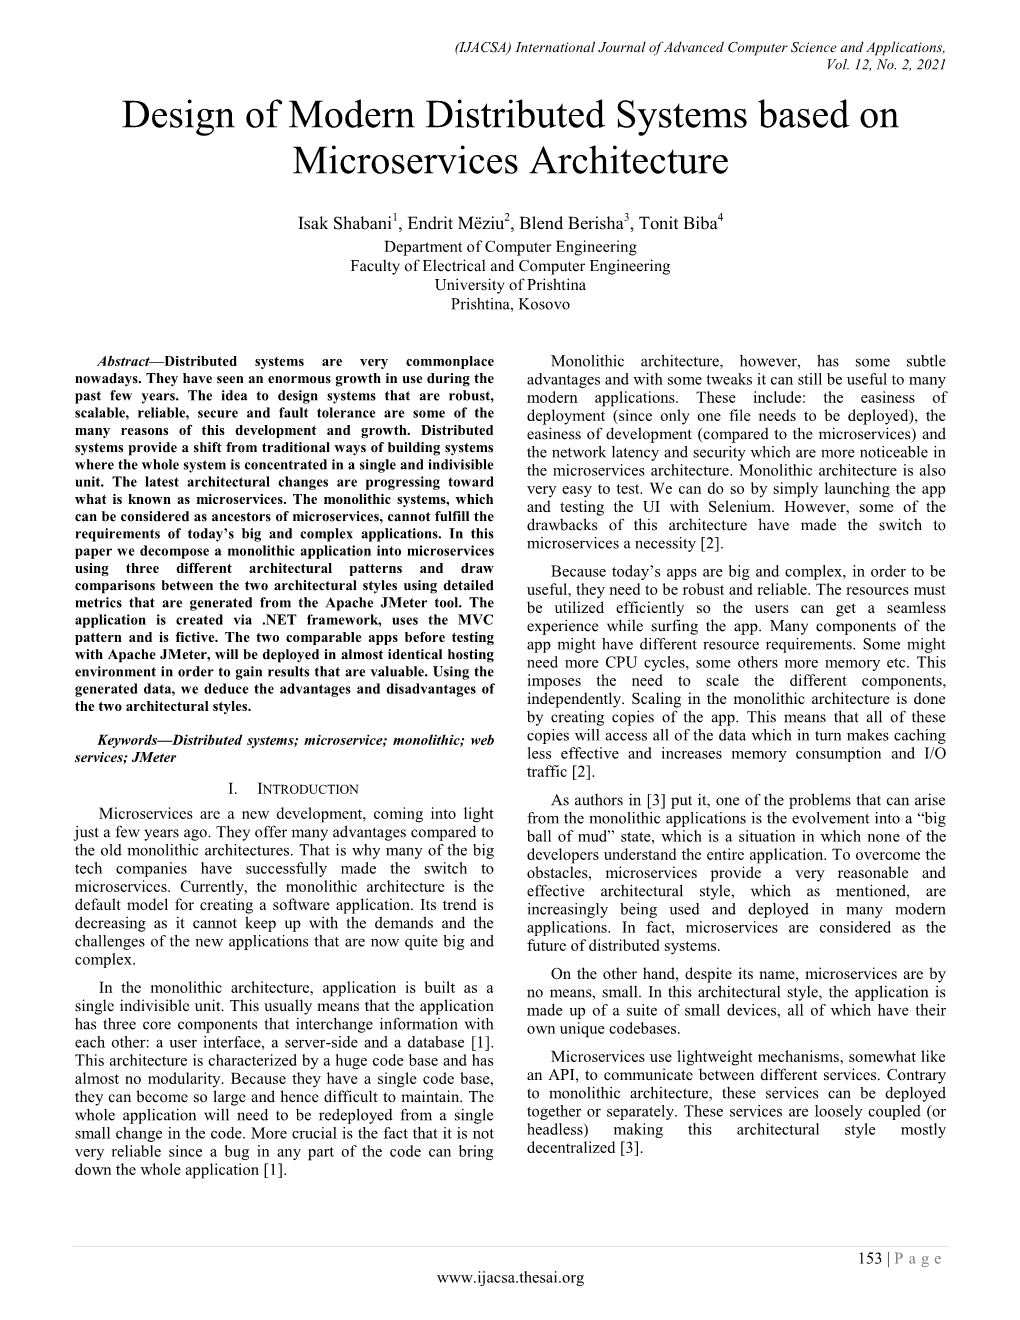 Design of Modern Distributed Systems Based on Microservices Architecture